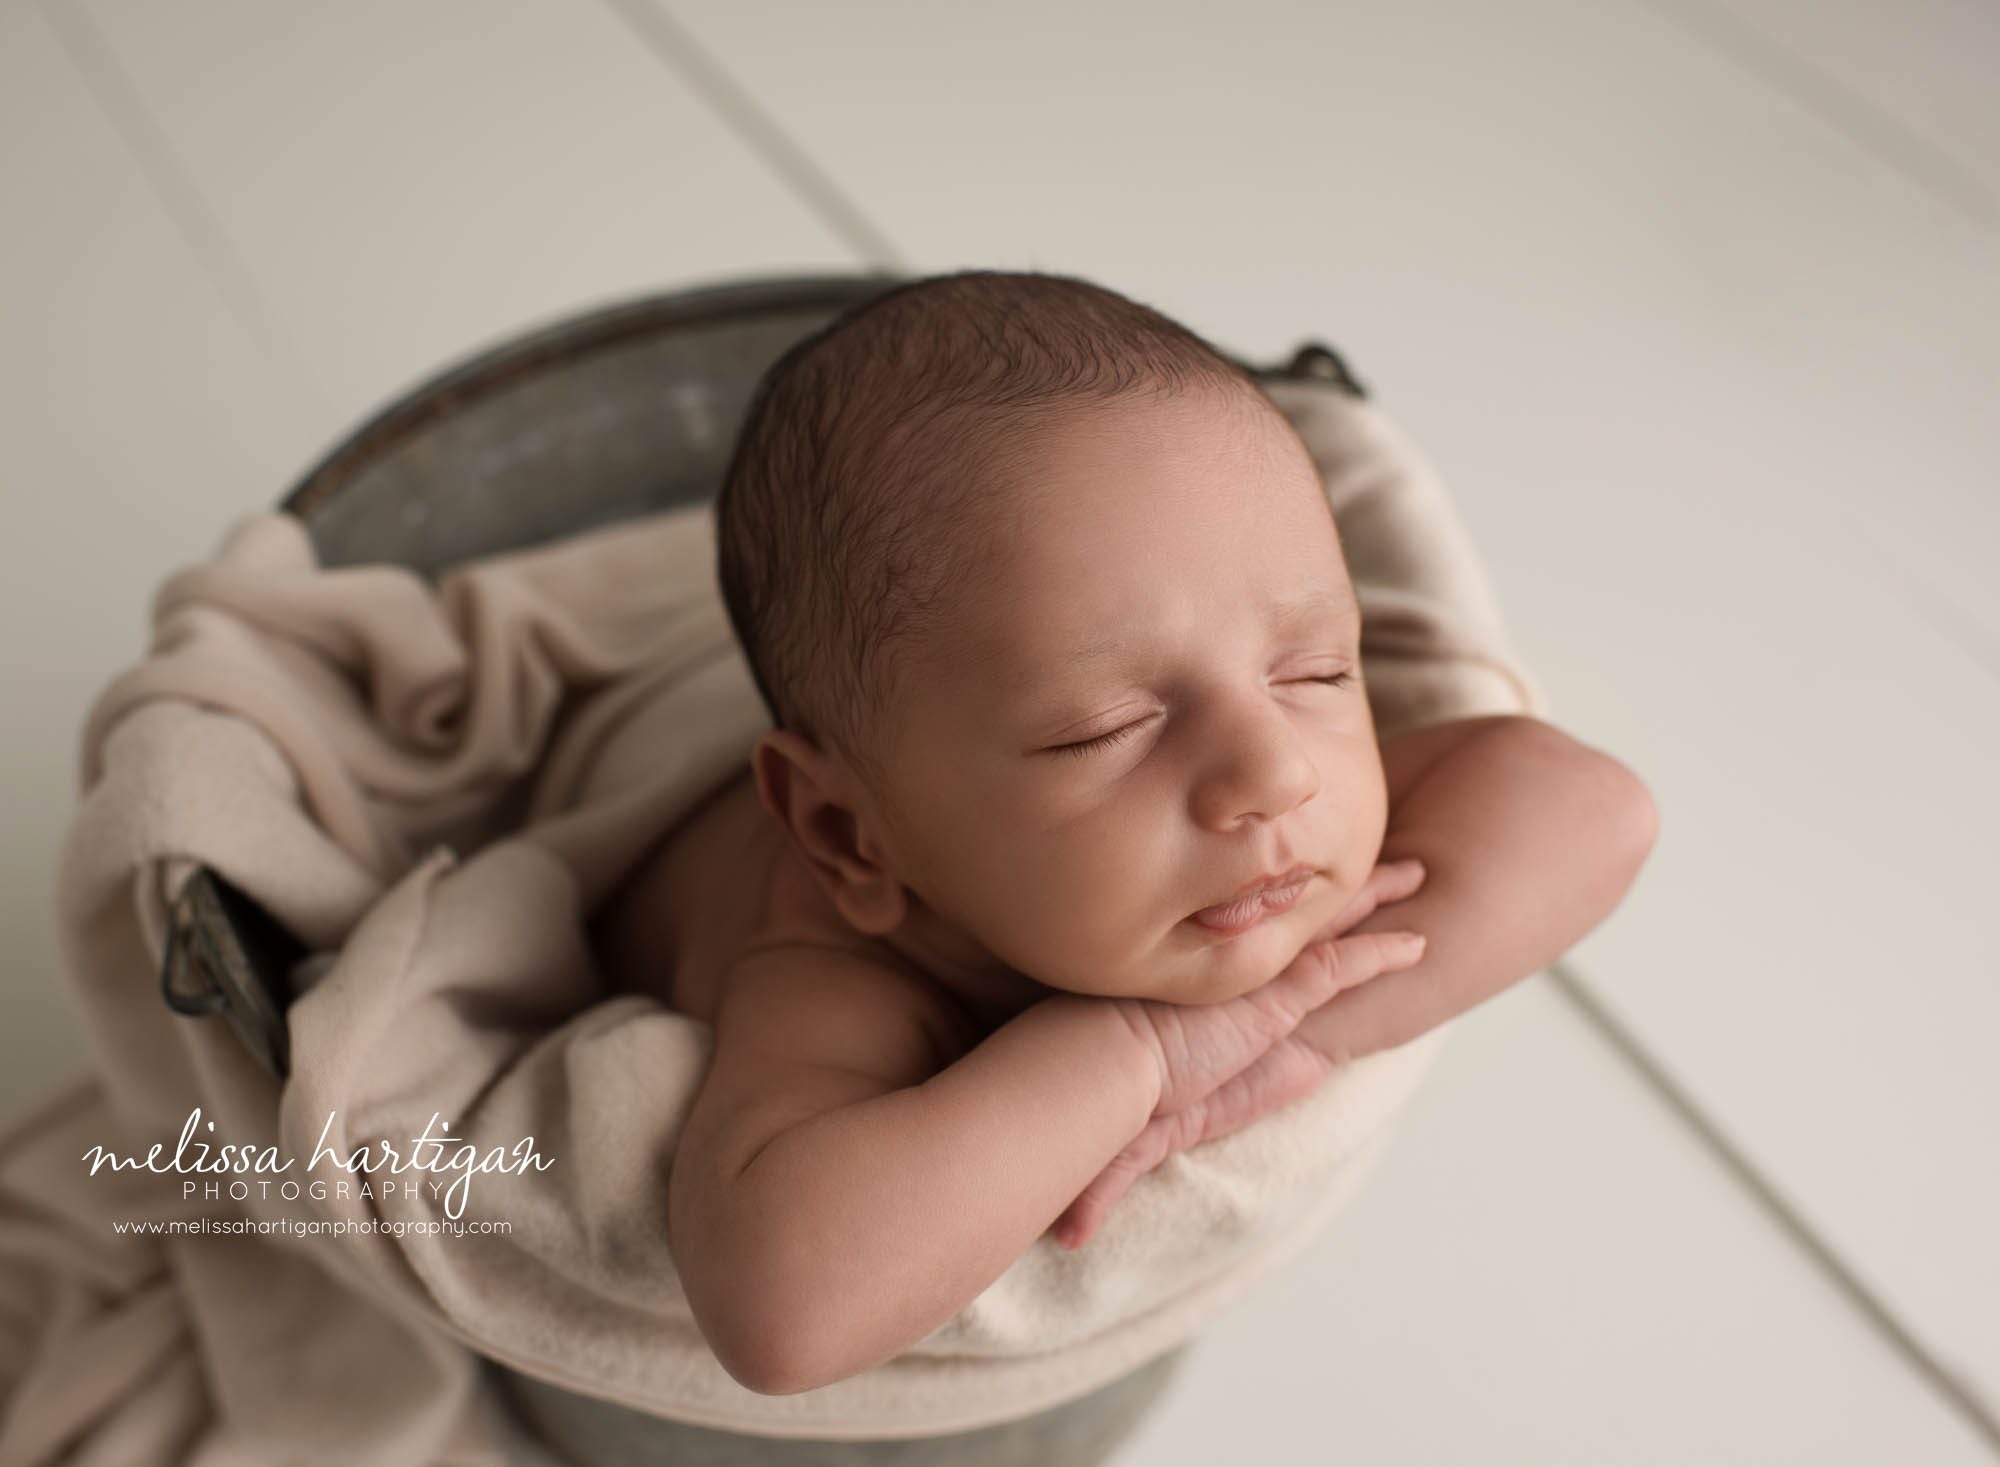 newborn baby boy posed in metal bucket with tan colored layer